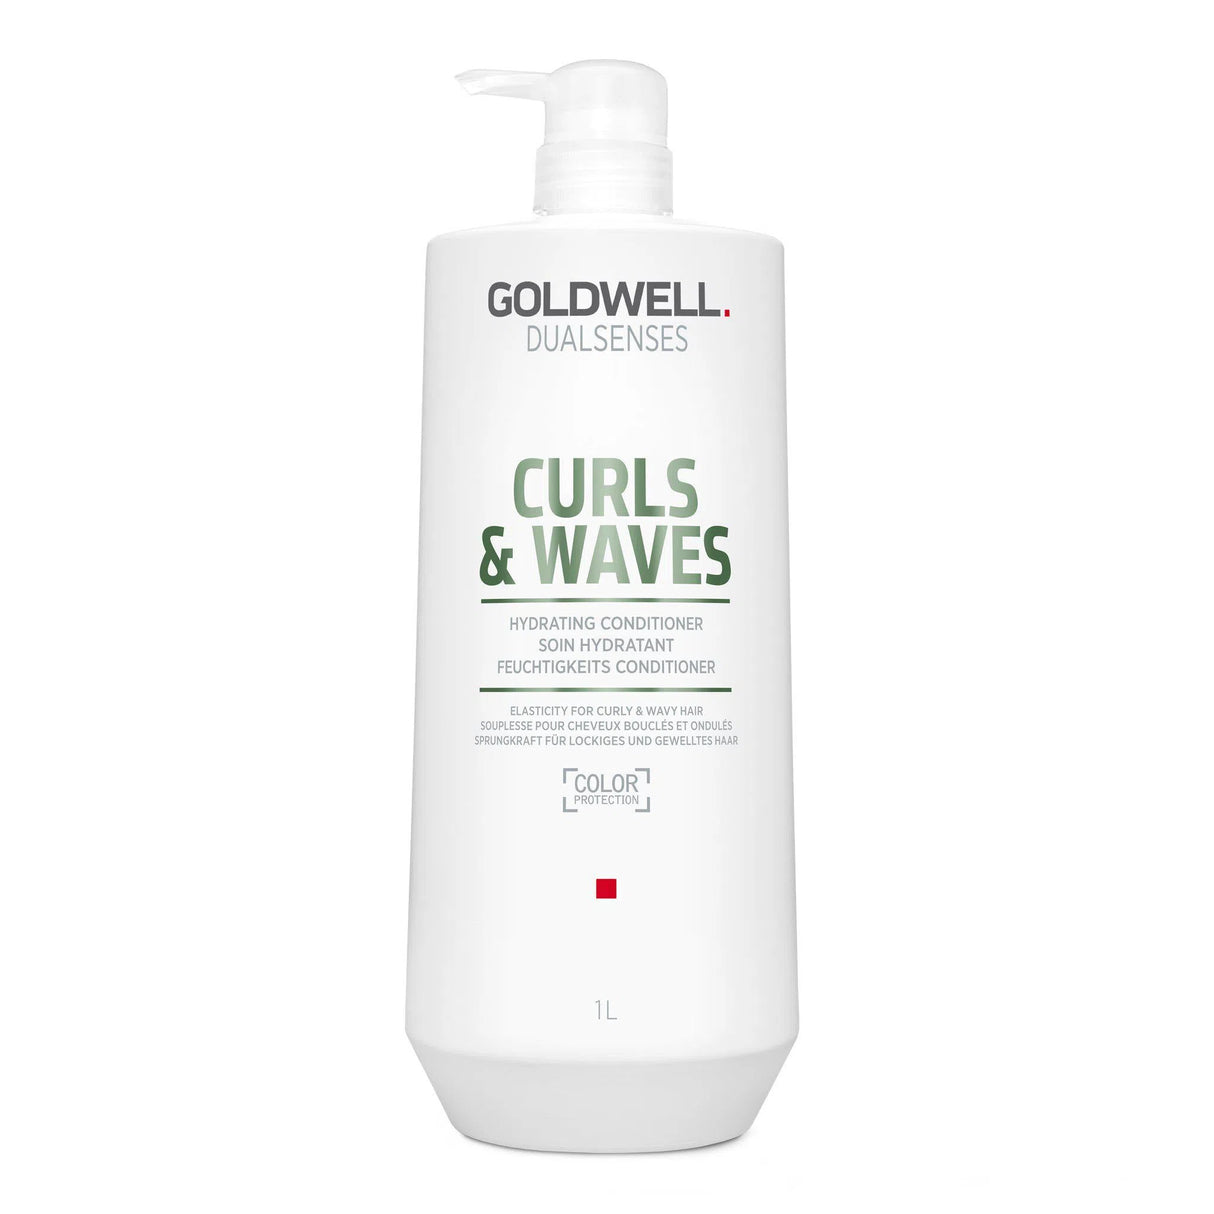 Curls + Waves Hydrating Conditioner